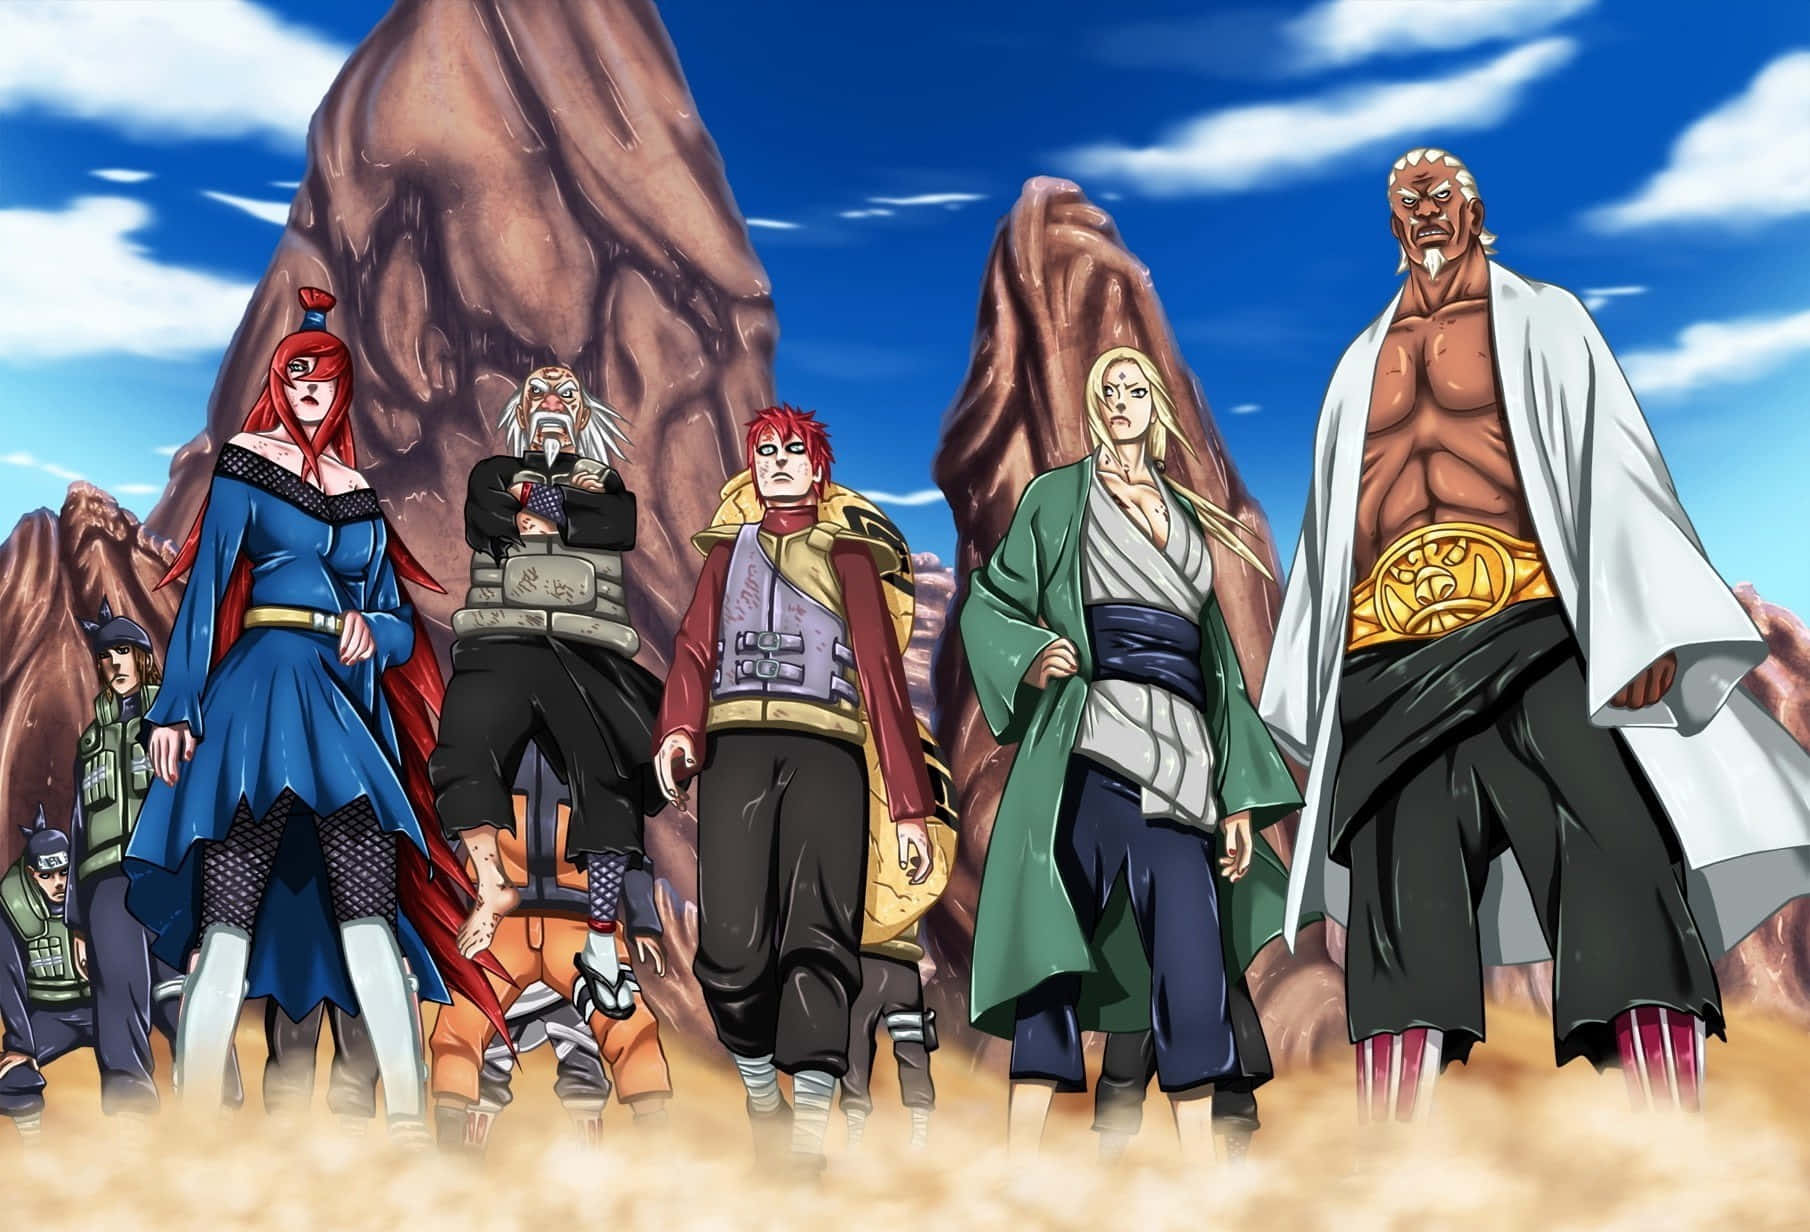 The Legendary Naruto Kage Surrounded by His Powerful Allies Wallpaper